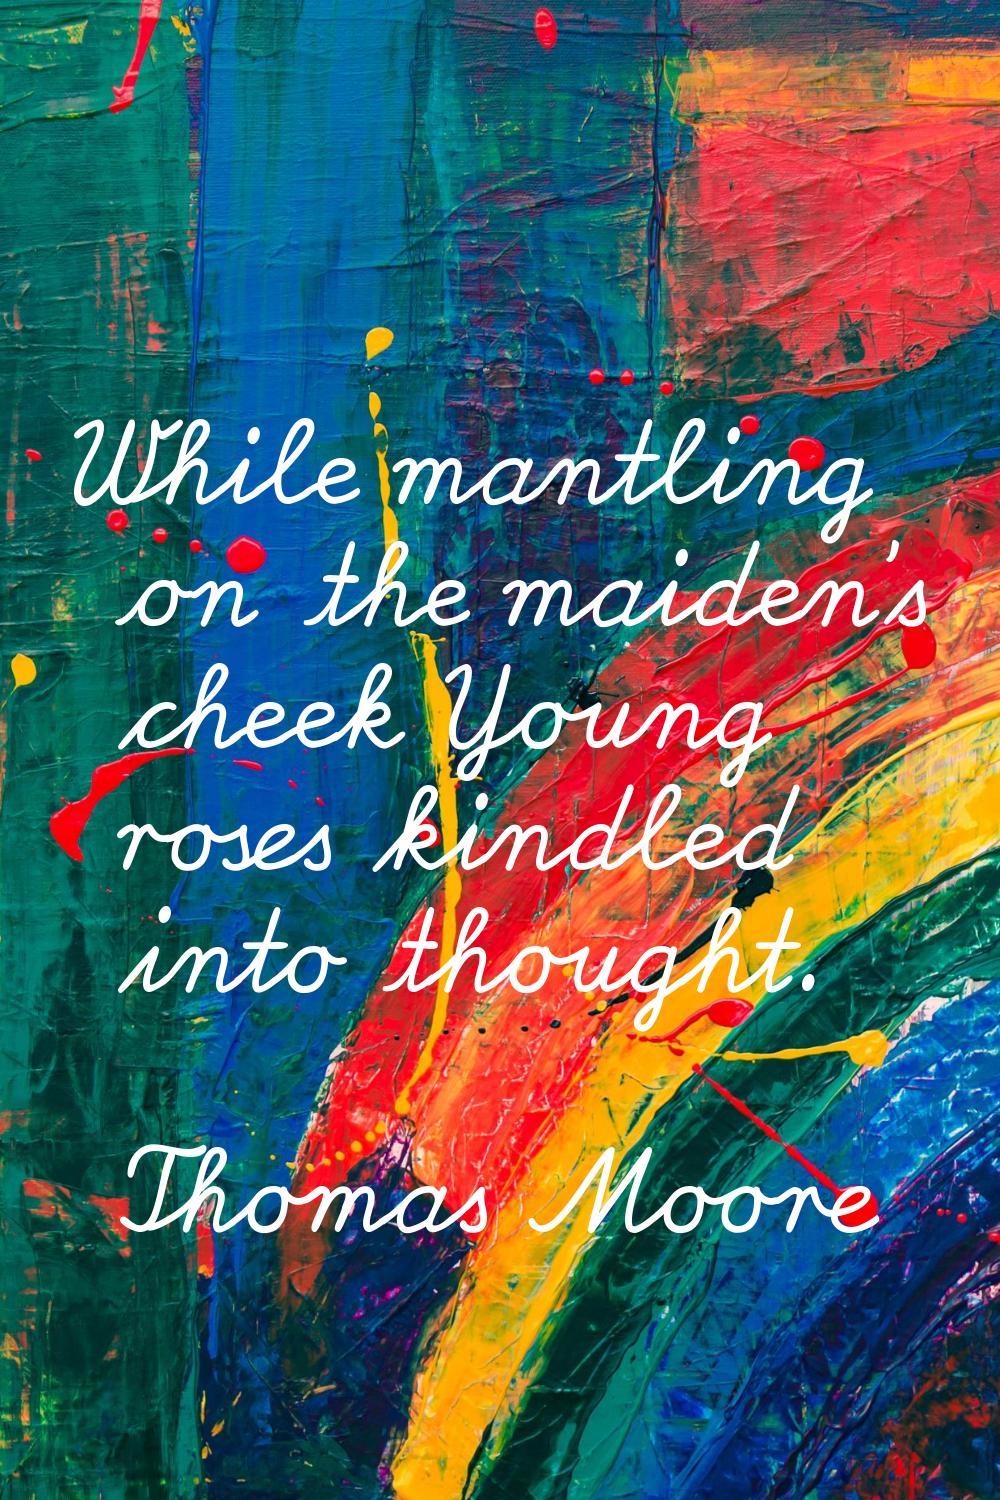 While mantling on the maiden's cheek Young roses kindled into thought.